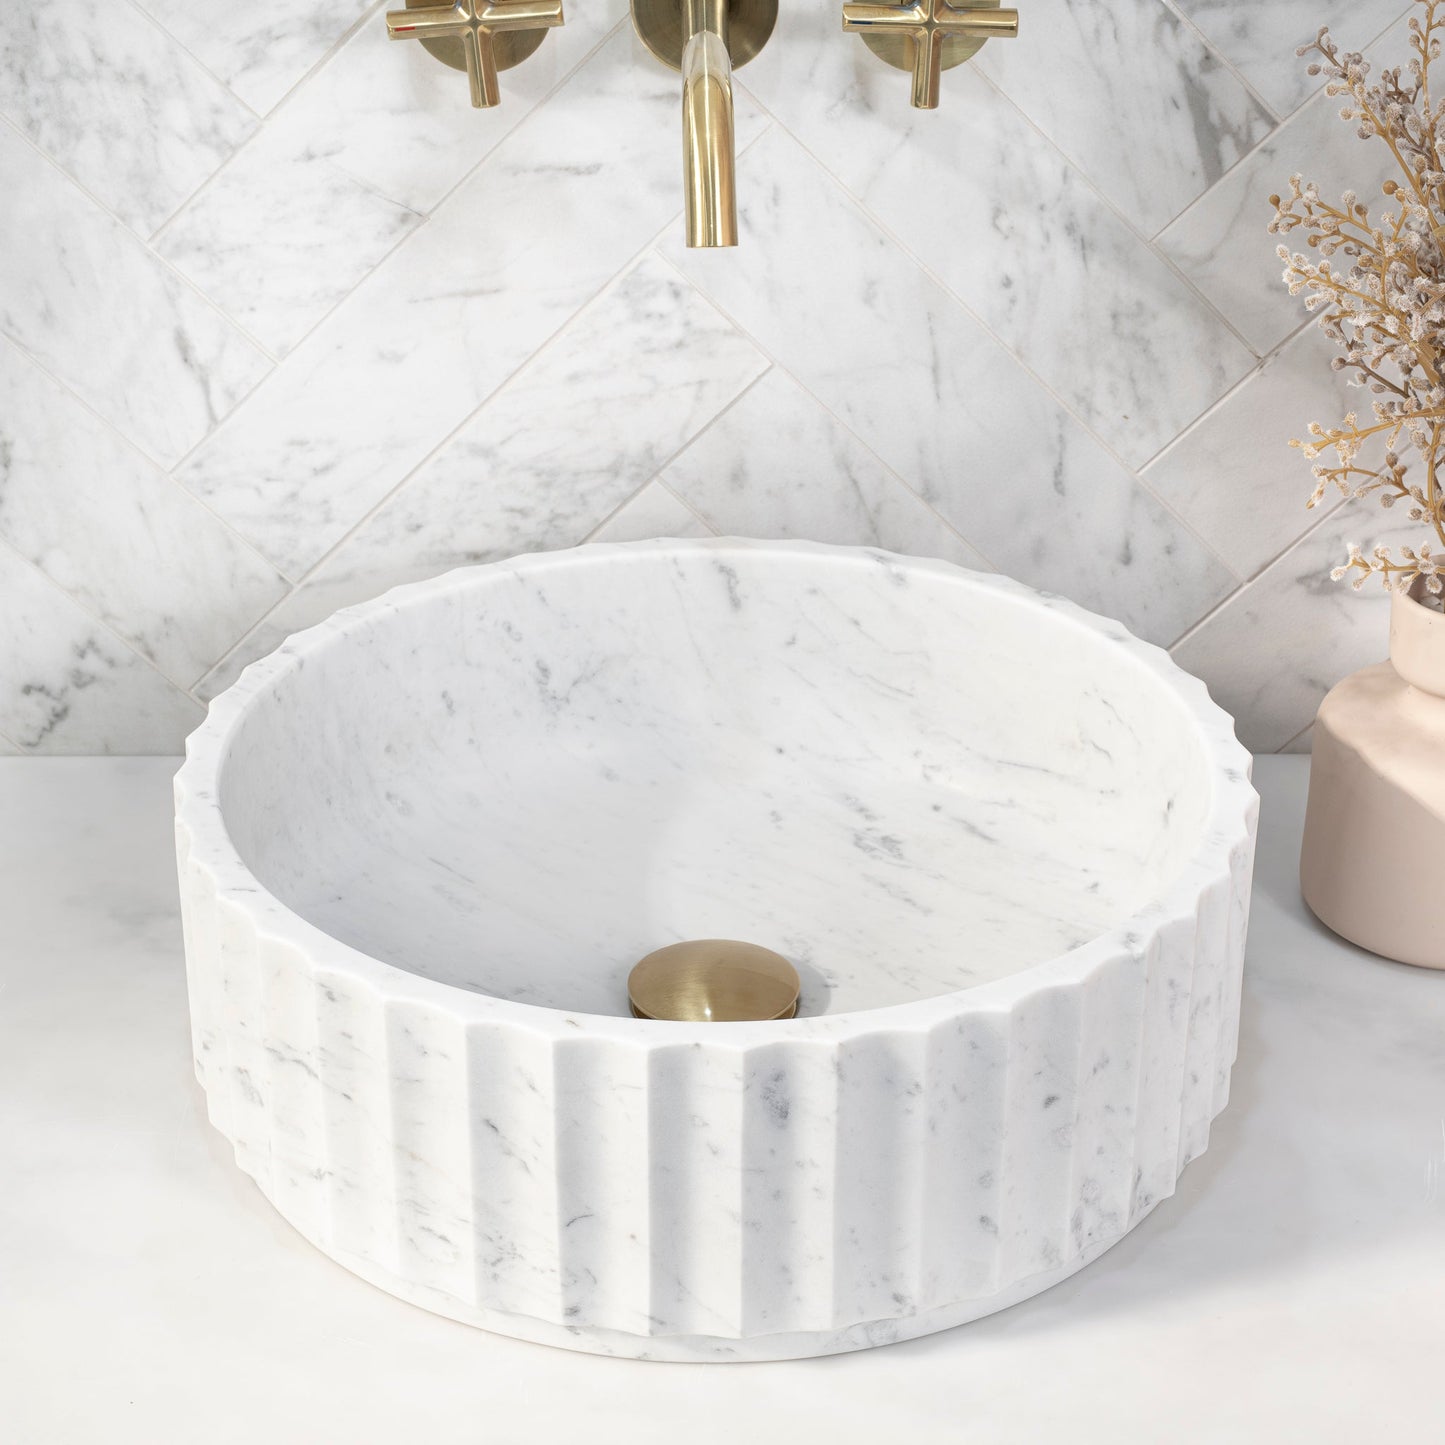 Kyklos Groove Round Fluted 395mm Above-Counter Marble Basin, Honed Carrara